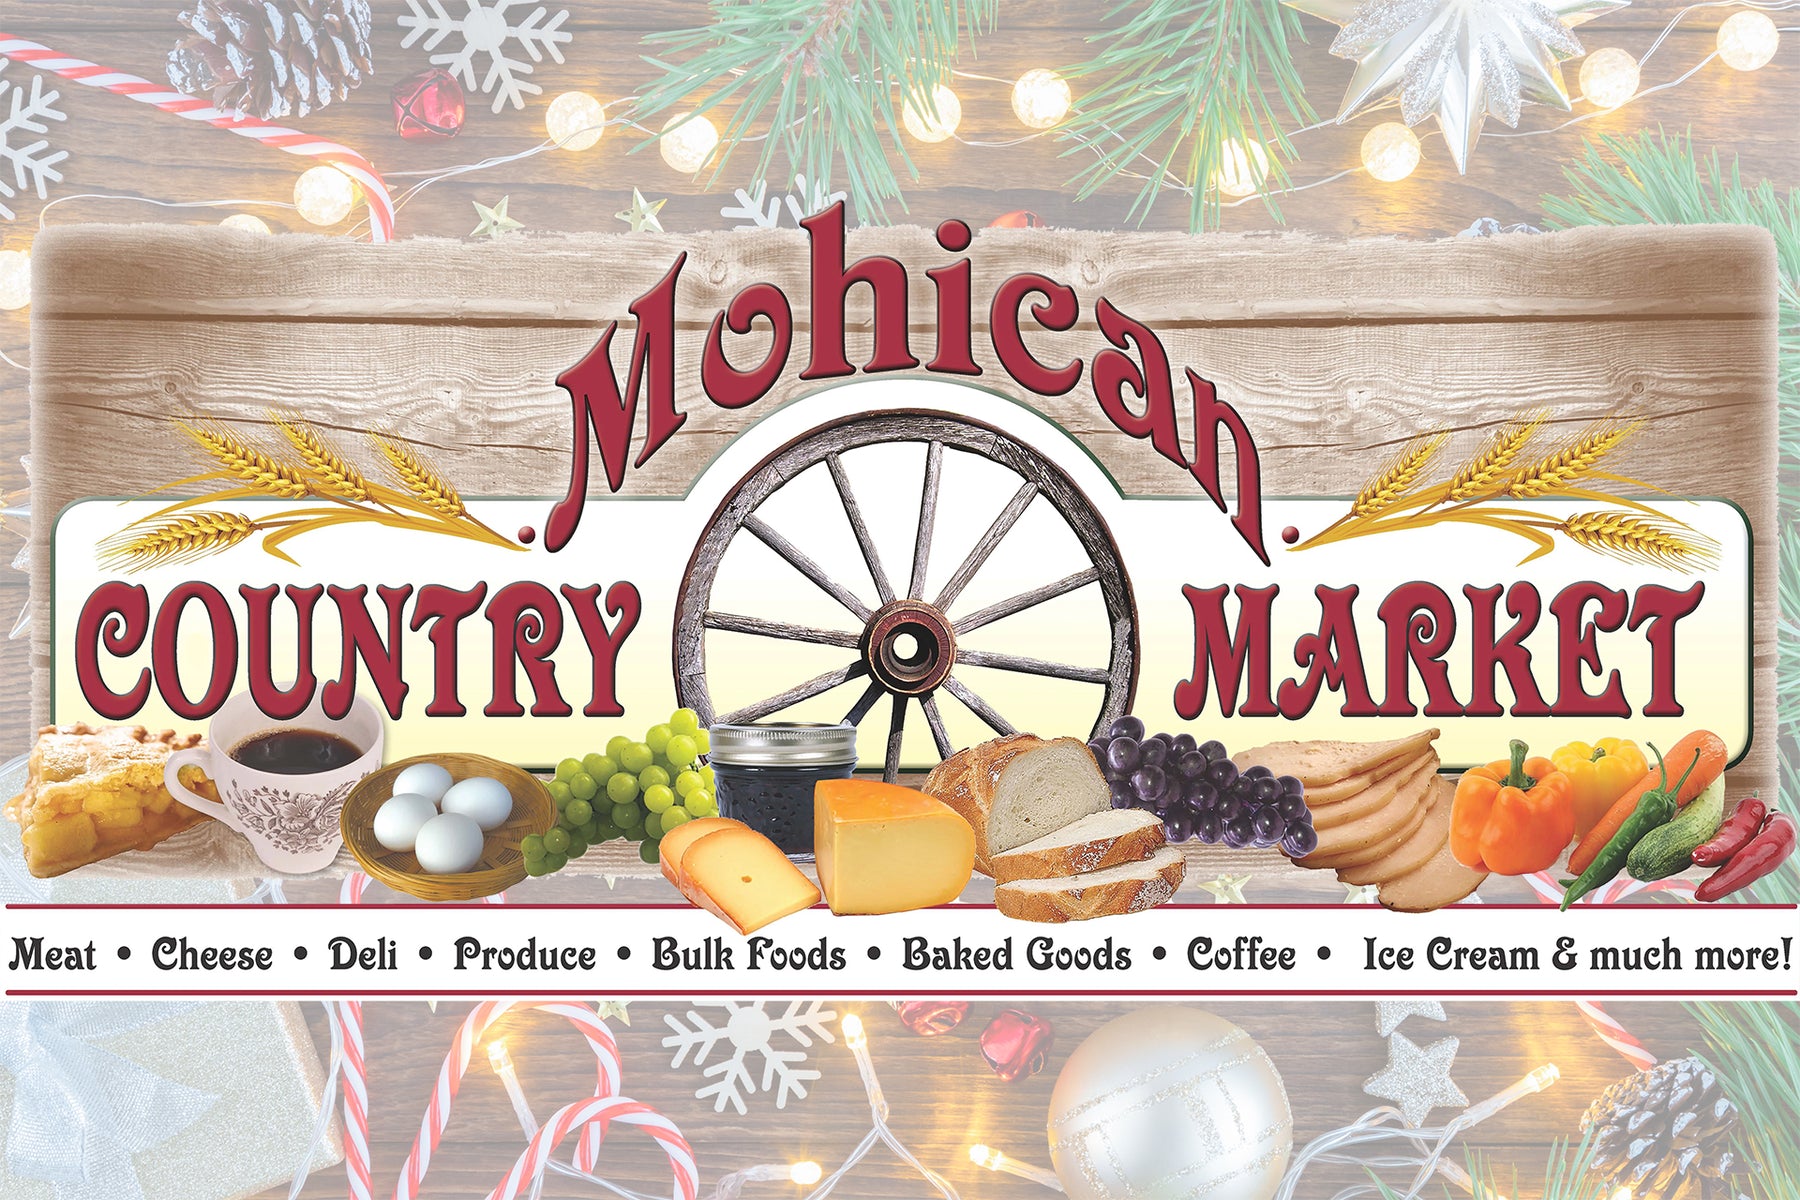 Exploring Amish Traditions: Unique Crafts and Goods at Mohican Country Market